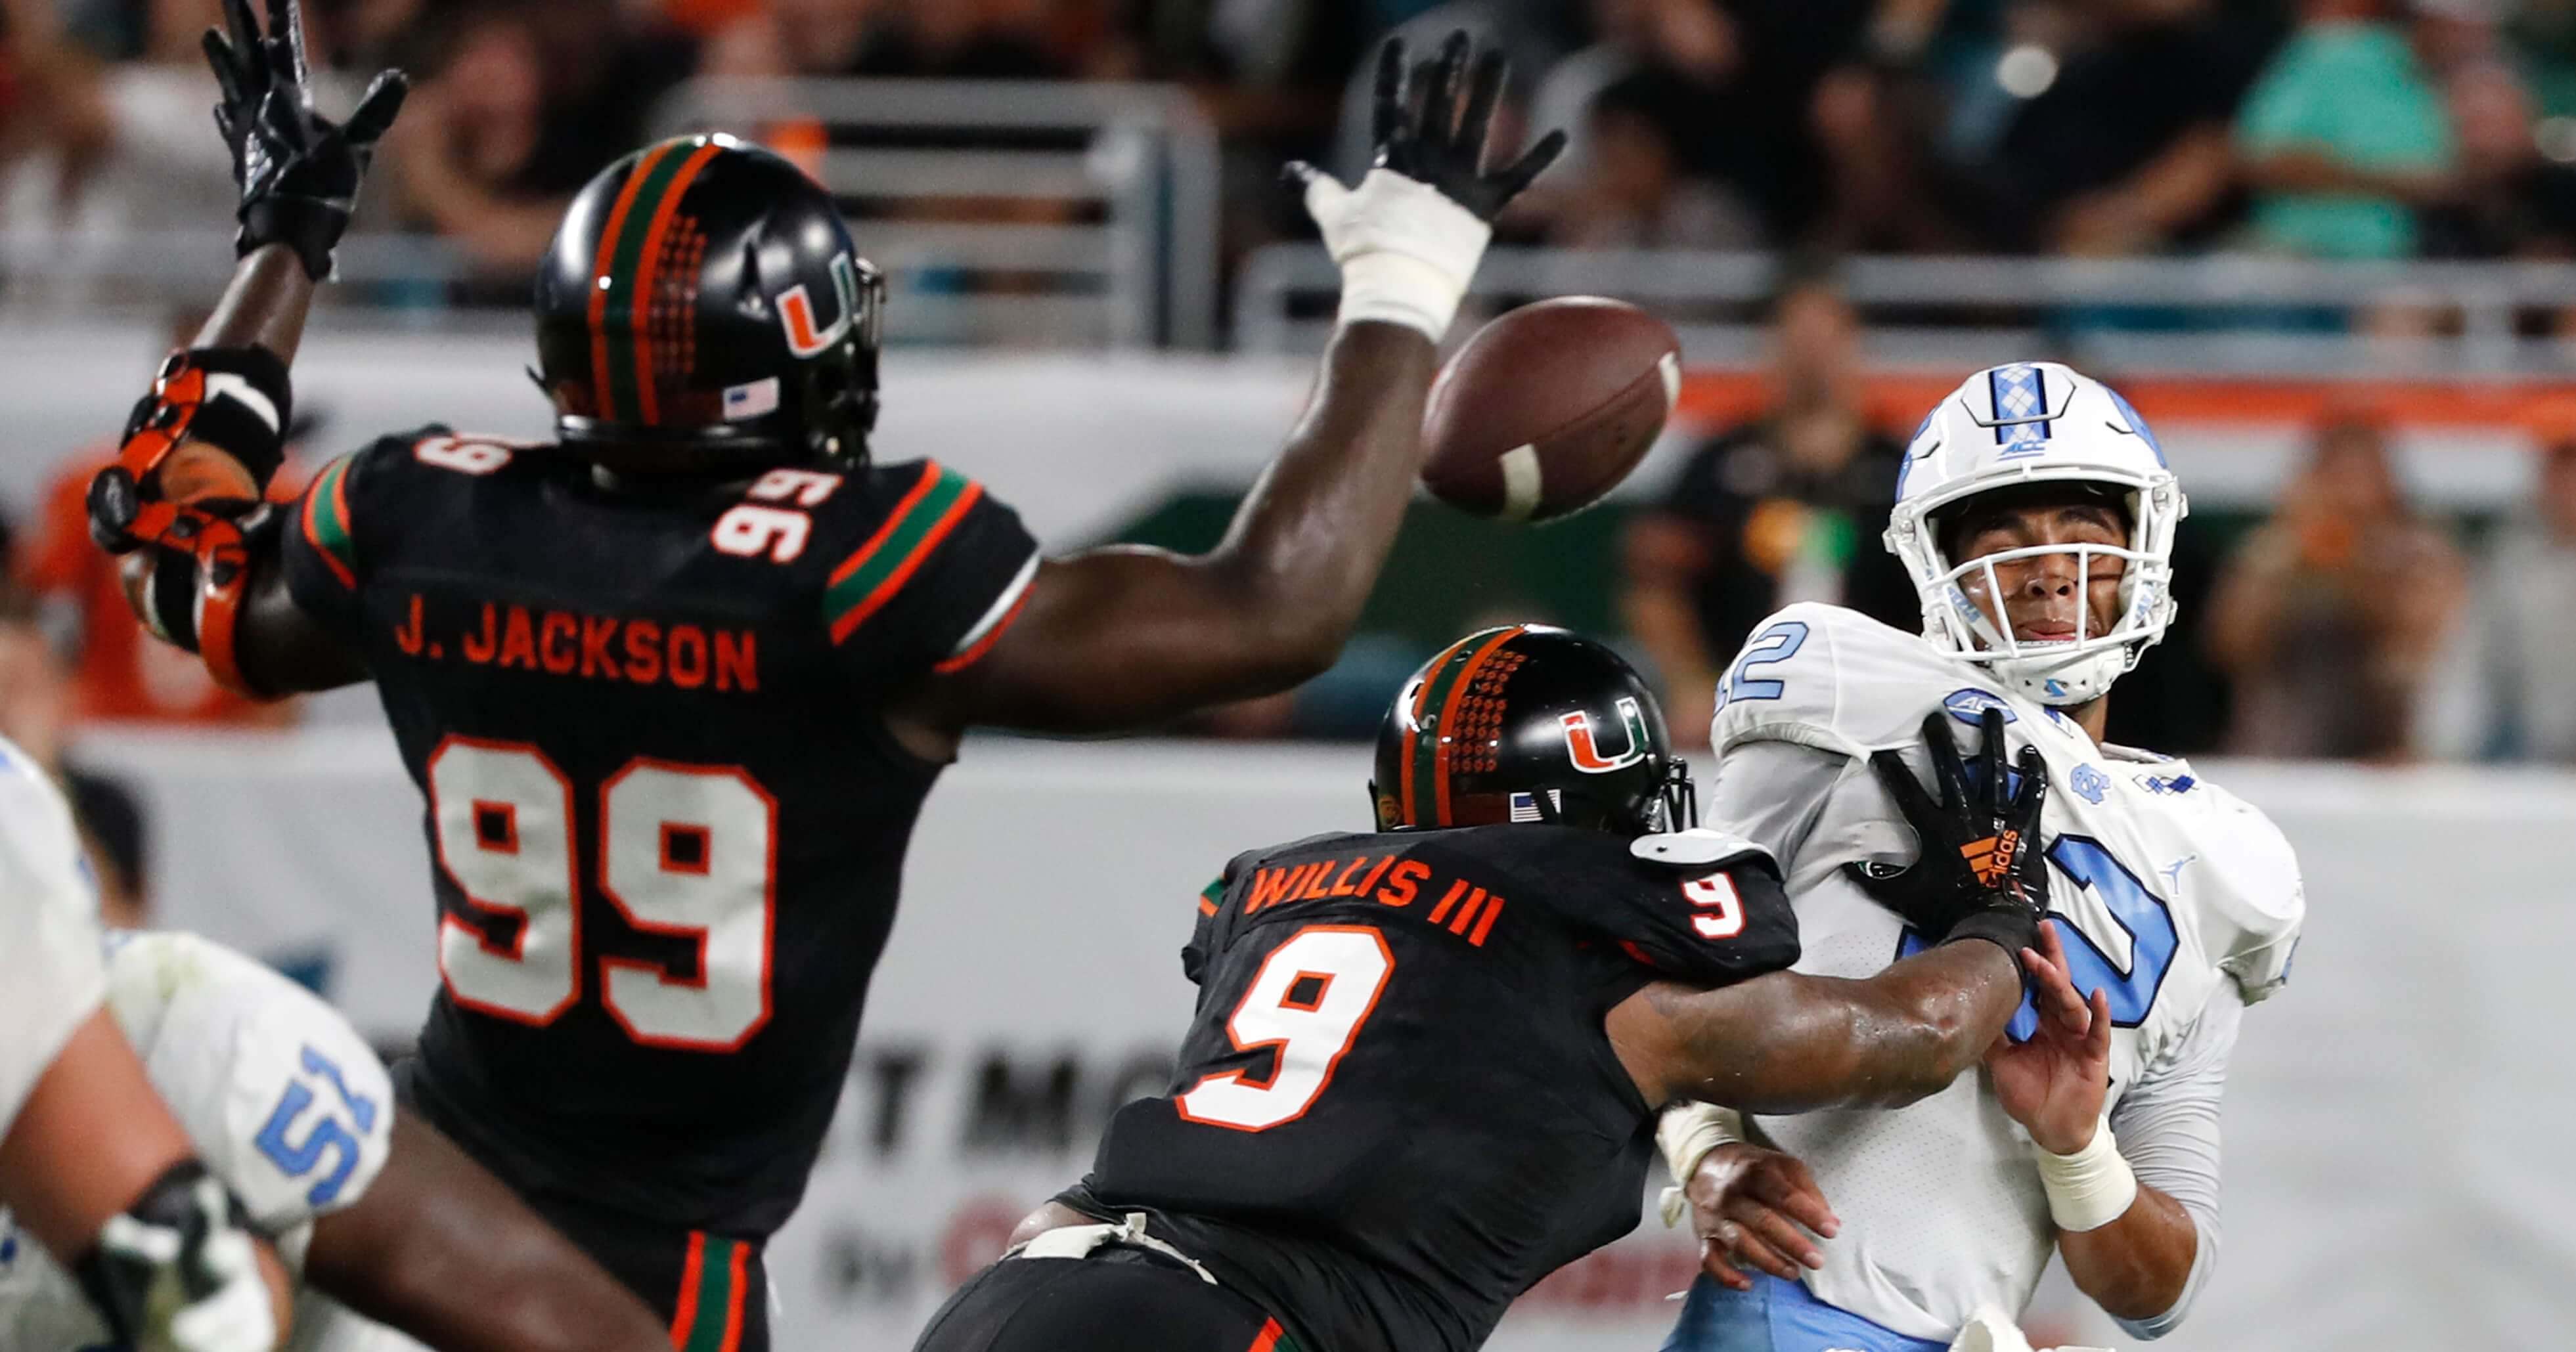 Miami defensive linemen Joe Jackson (99) and Gerald Willis III (9) rush North Carolina quarterback Chazz Surratt (12) as he attempts to pass during the first half of the Hurricanes' home game Thursday night.